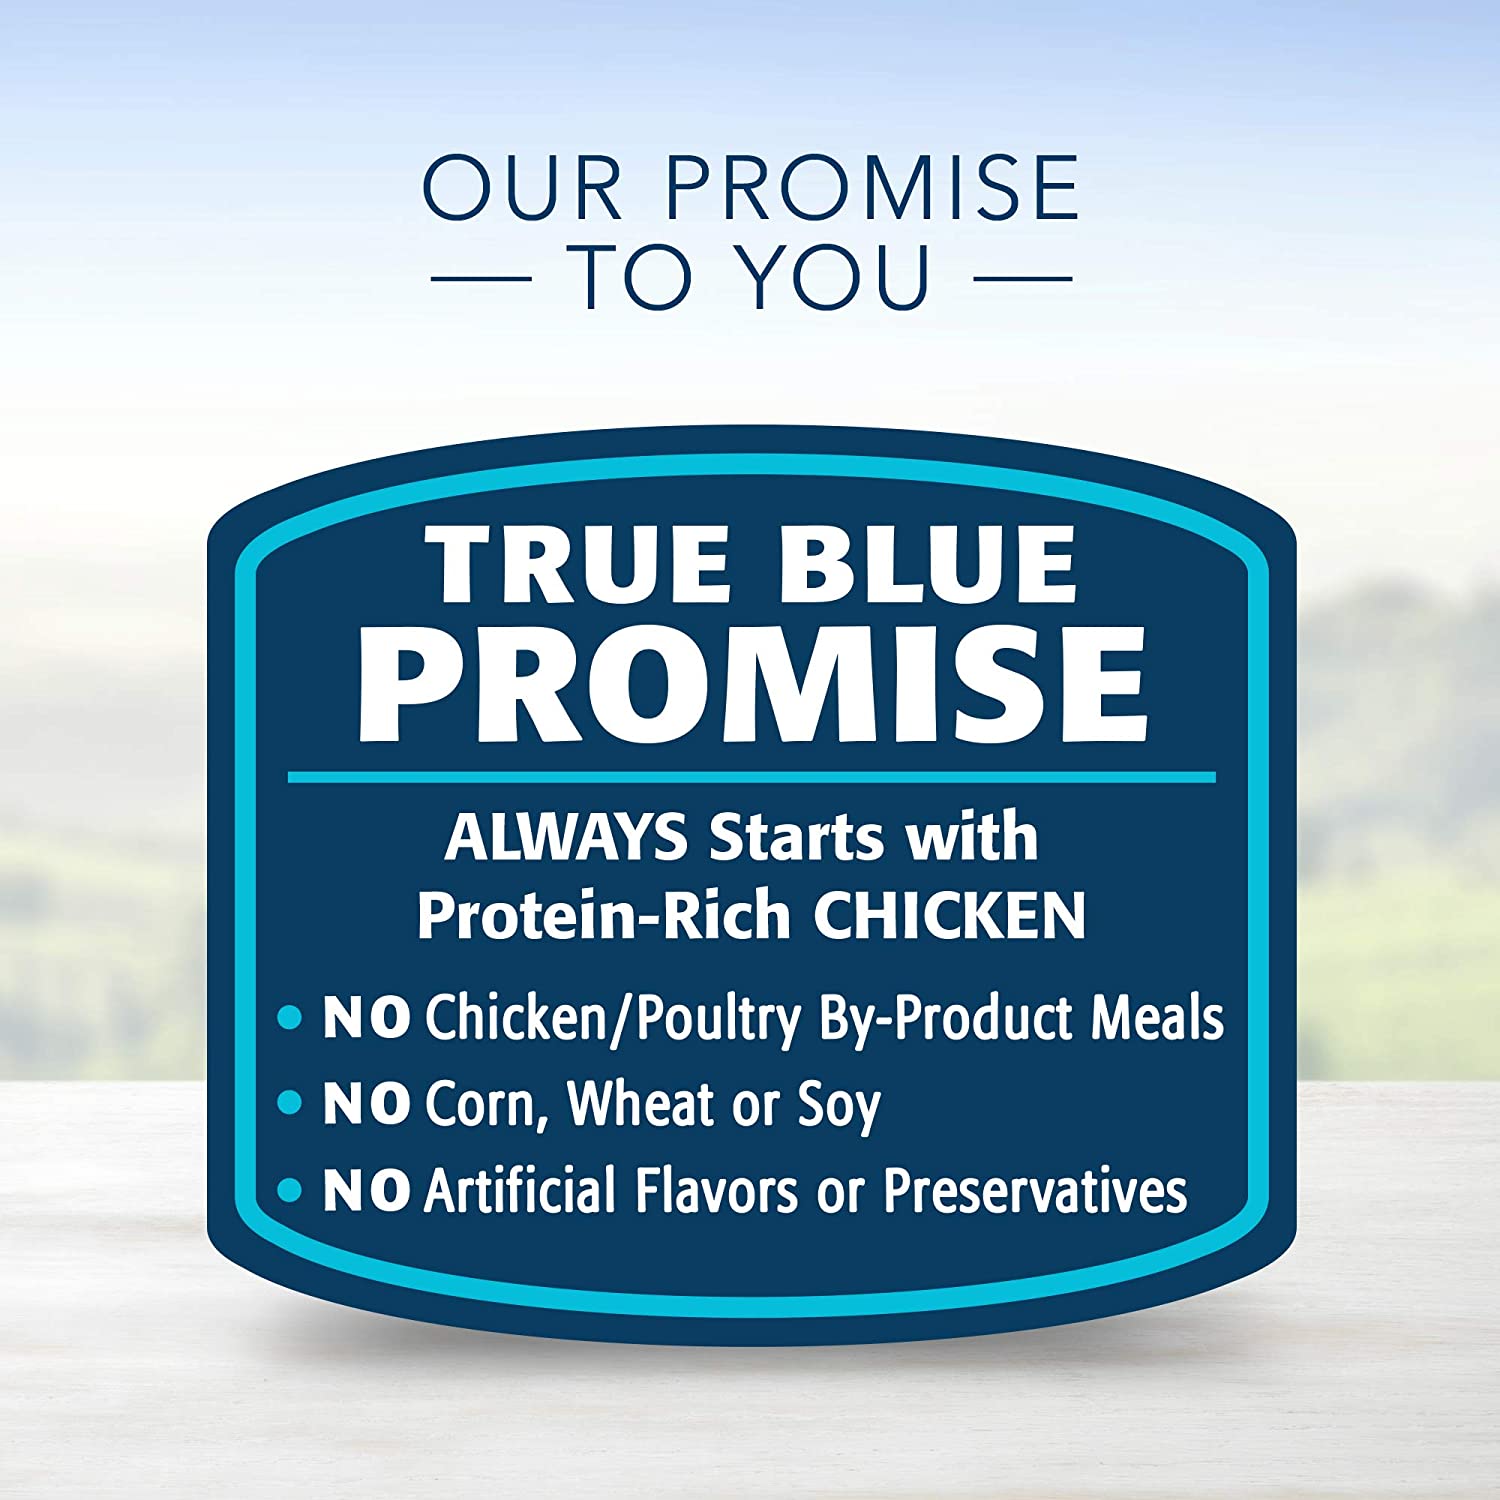 Blue Buffalo Healthy Gourmet Natural Adult Pate Wet Cat Food - Indoor Chicken Pate Entrée